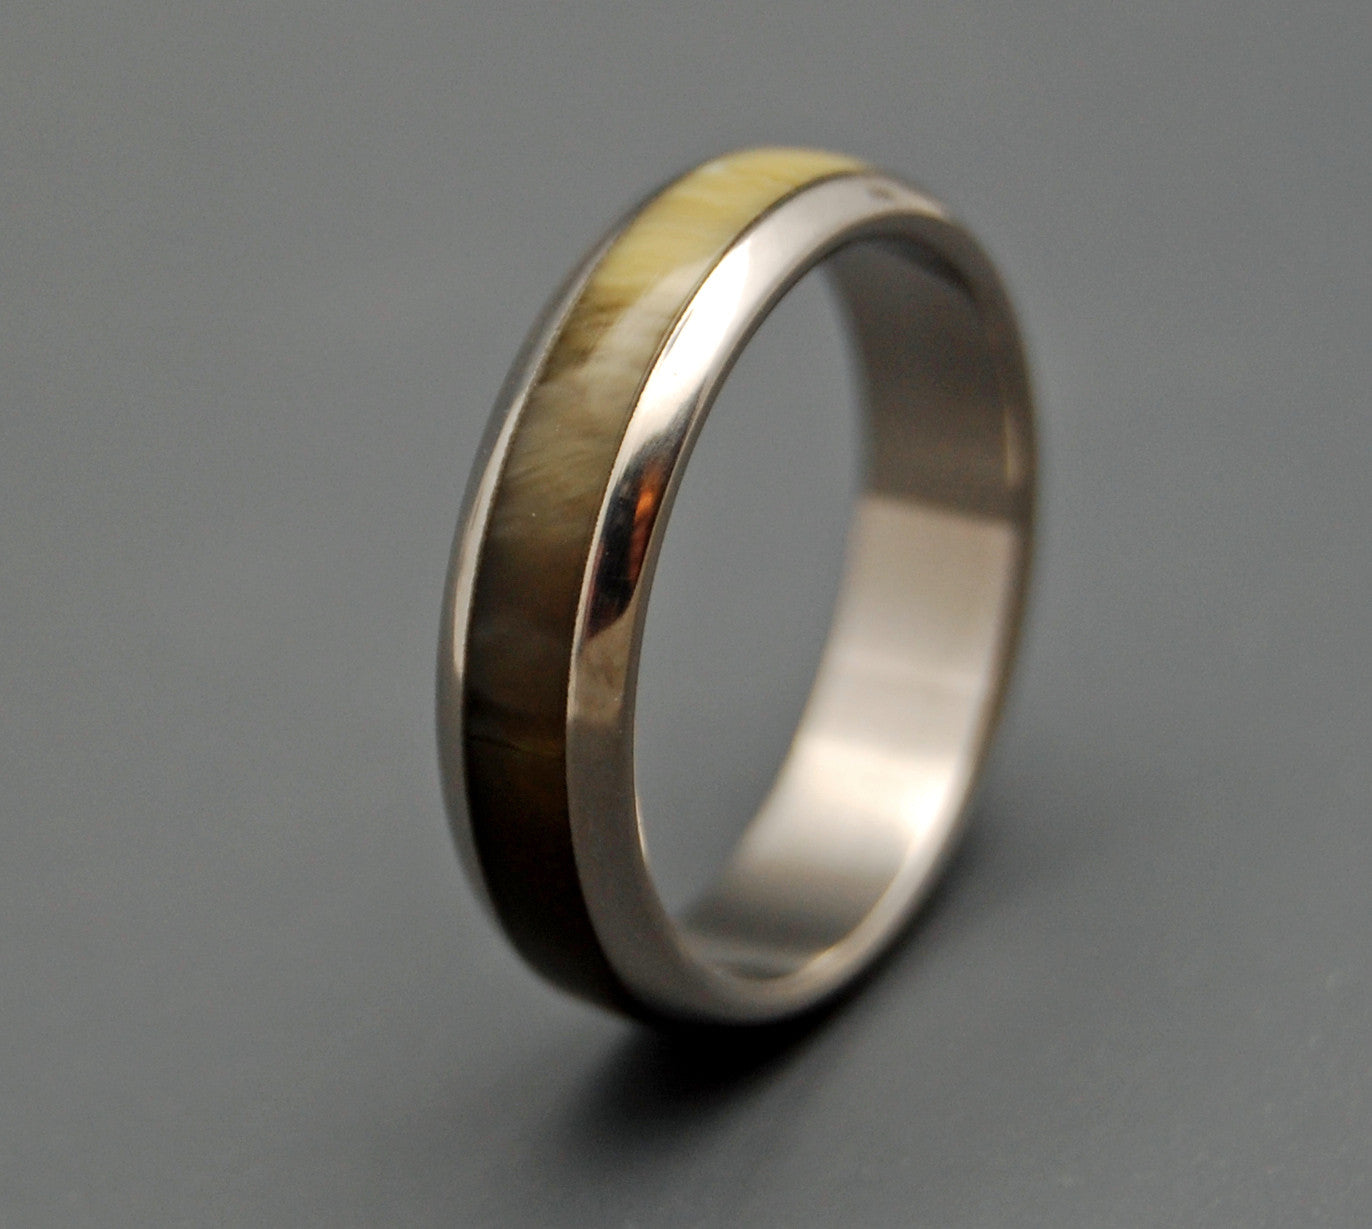 Palomino | Horn and Titanium Wedding Ring - Minter and Richter Designs